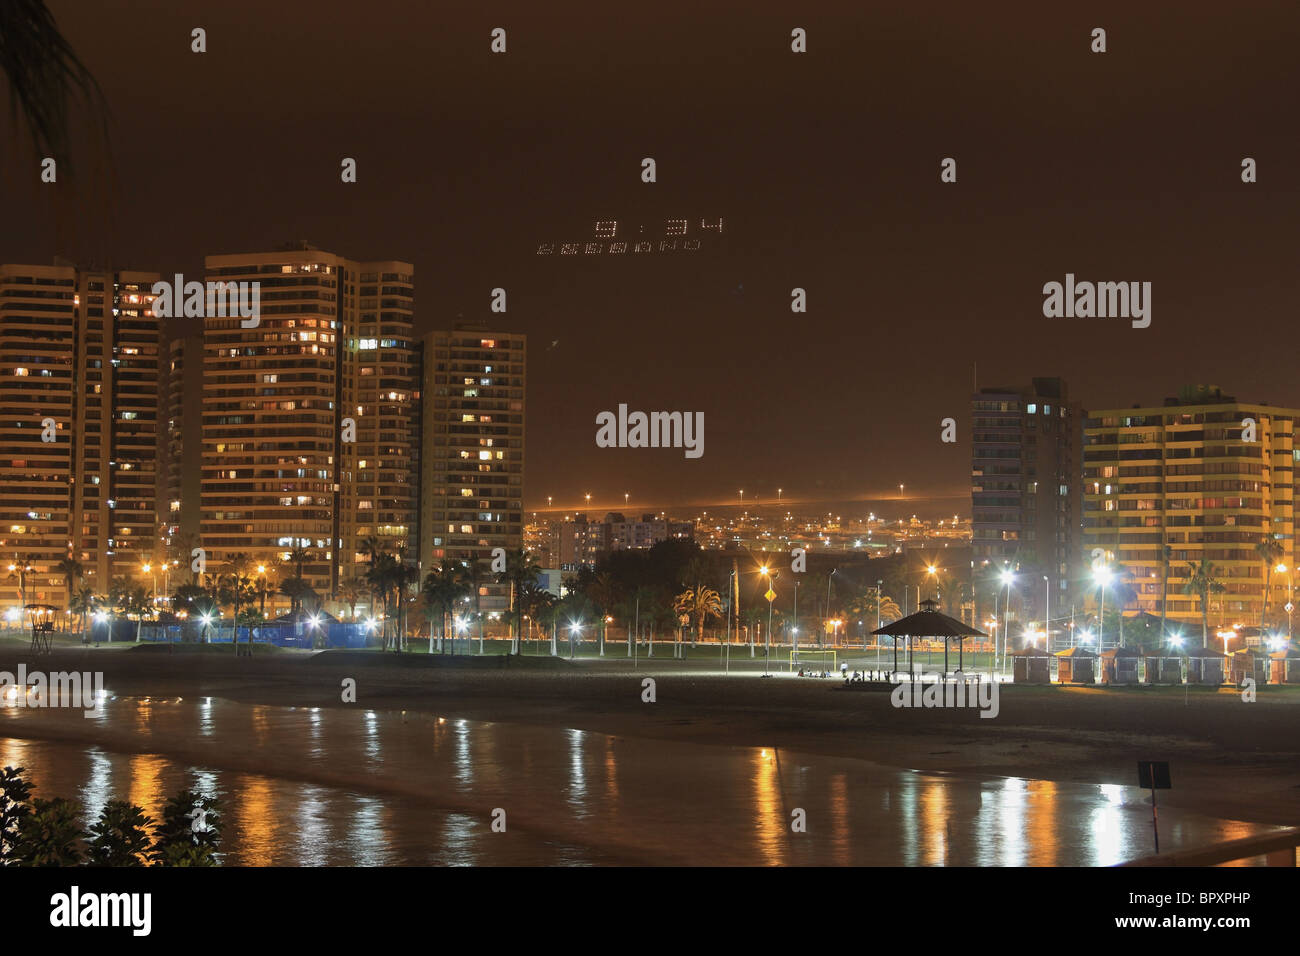 The city of Iquique, northern Chile, at night Stock Photo